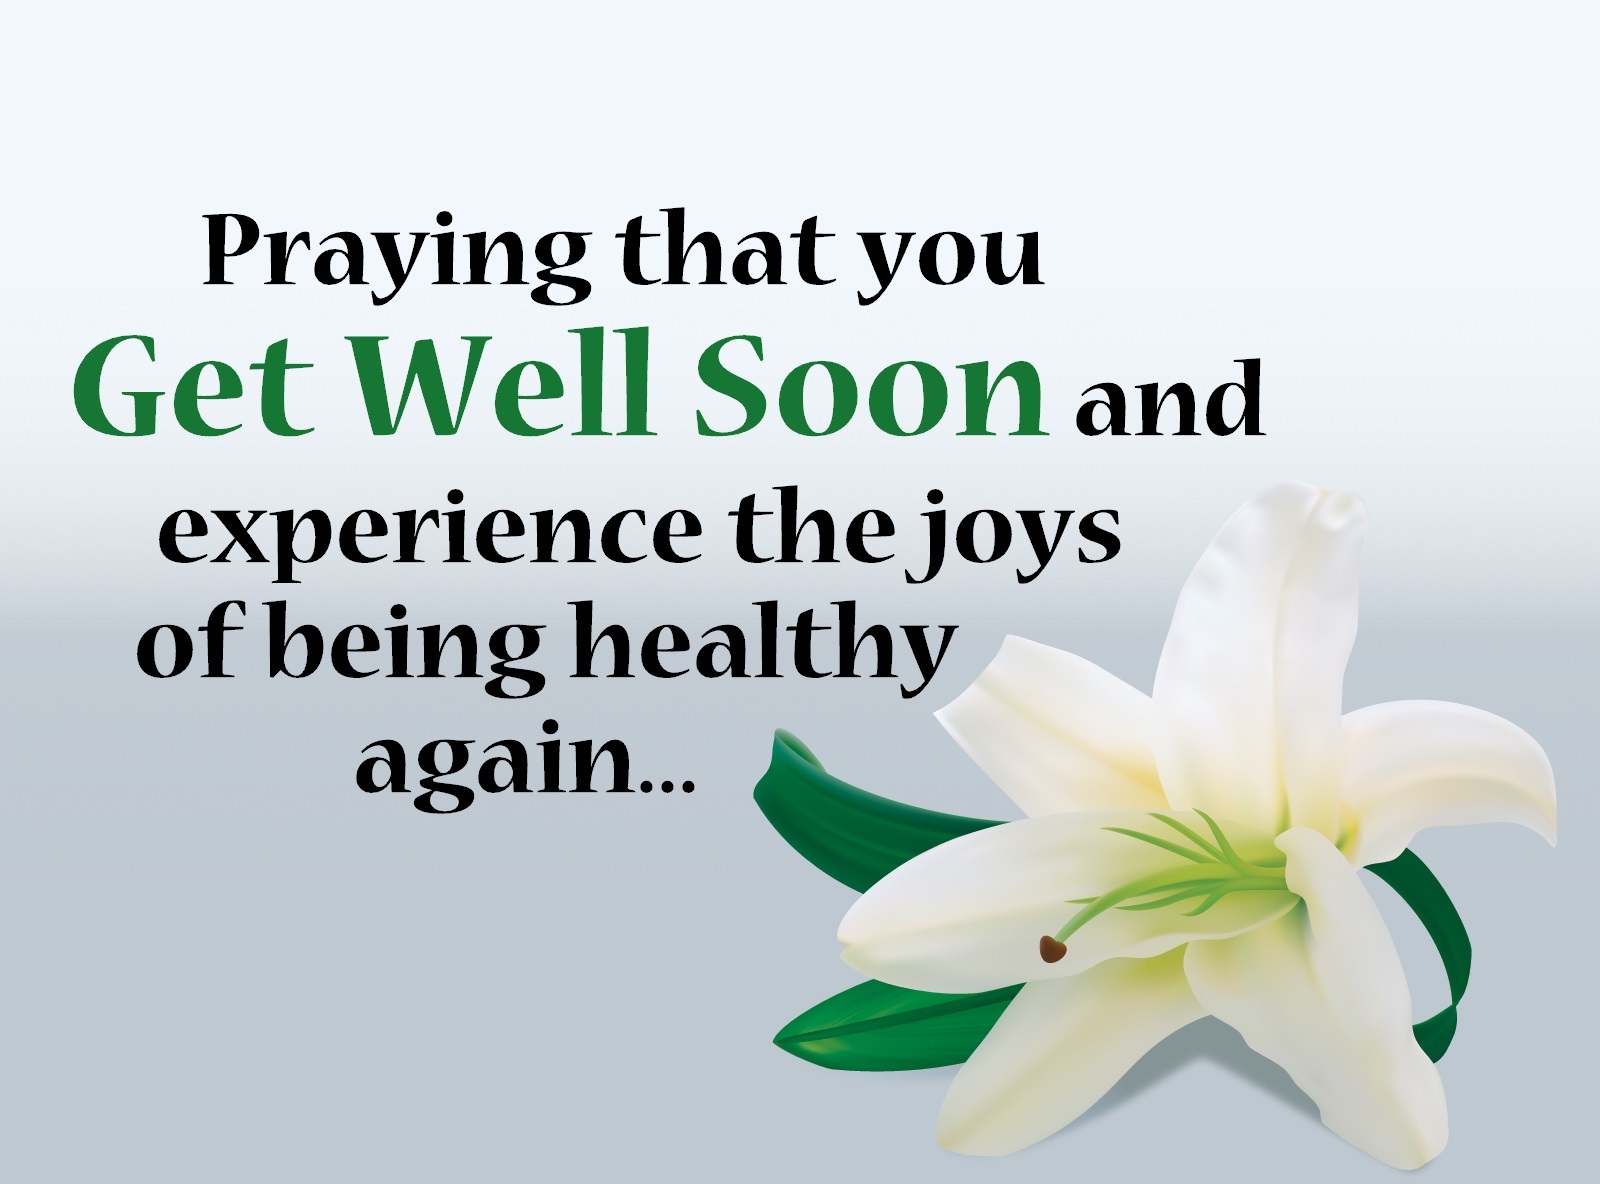 get well soon wishes image